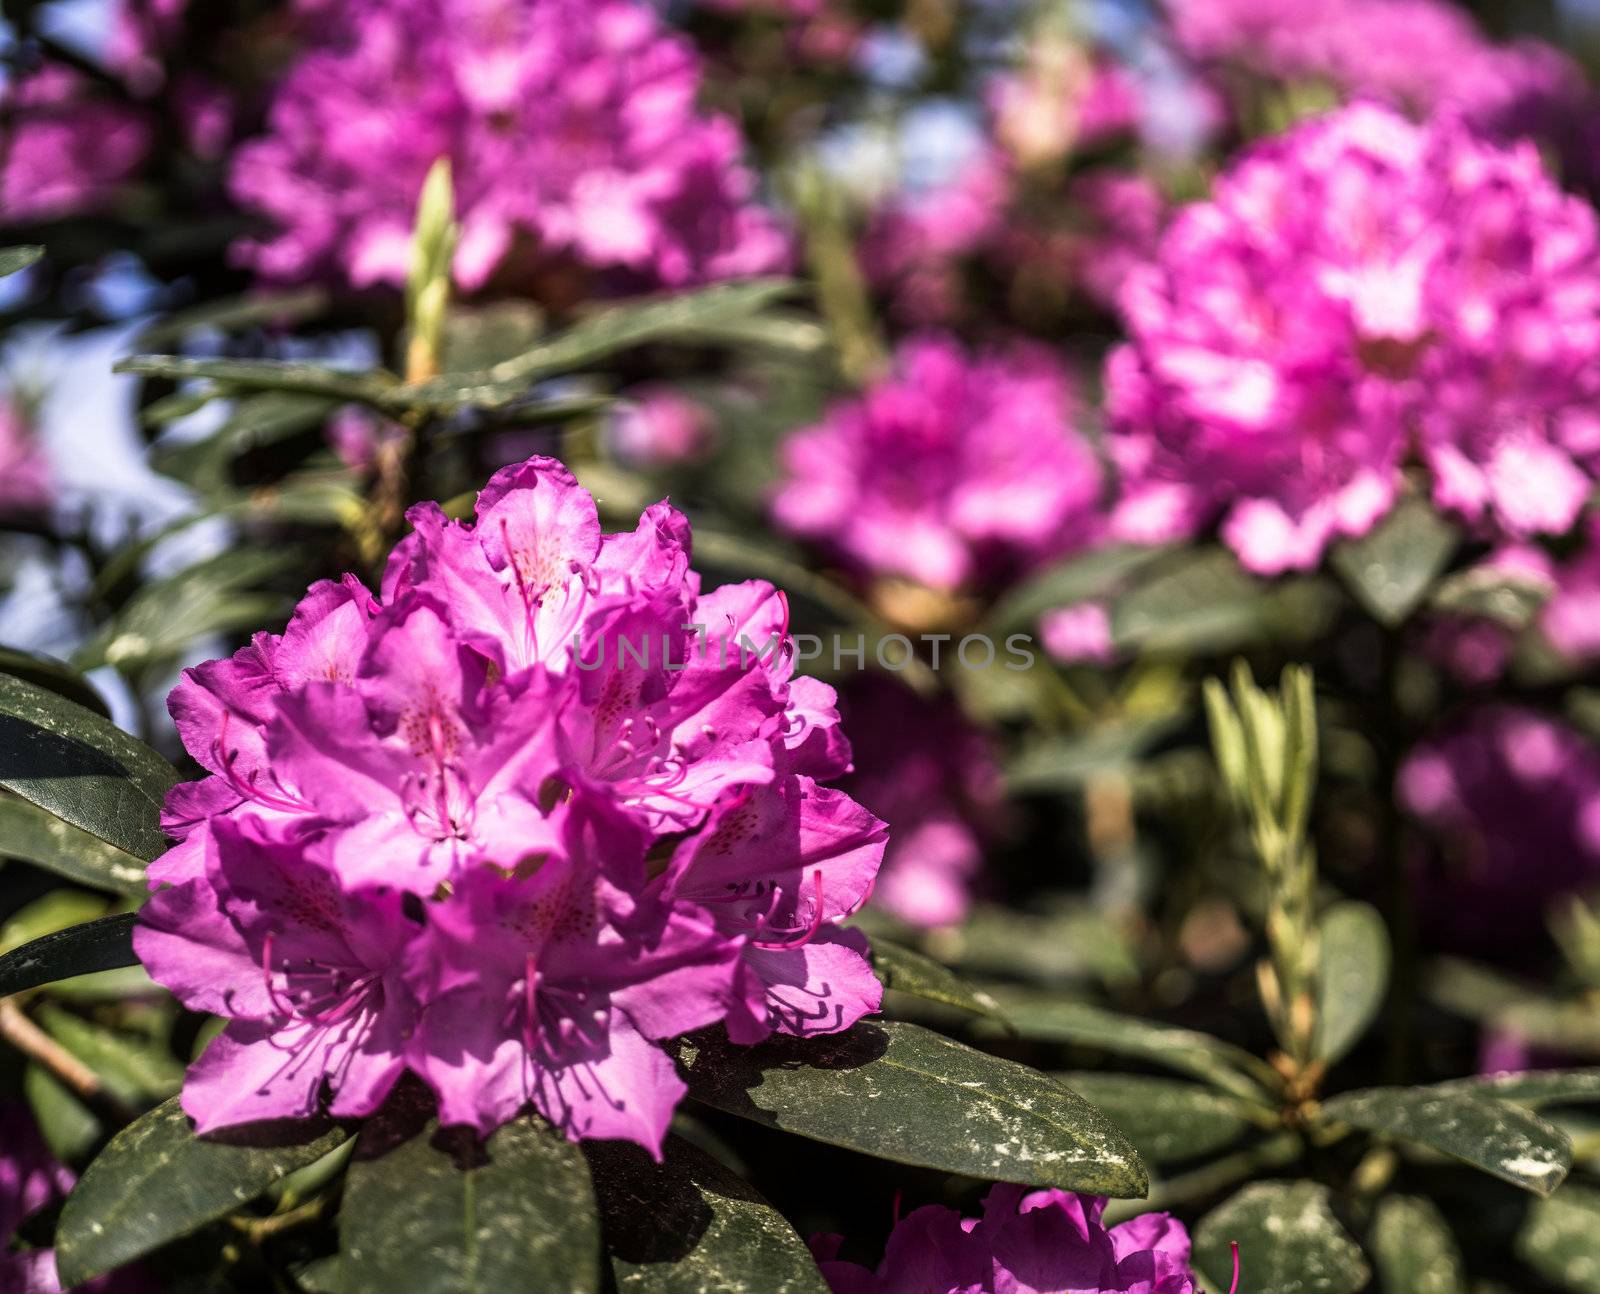 violet-flowering rhododendron, front flowering sharp, rear area intentionally blurred by geogif